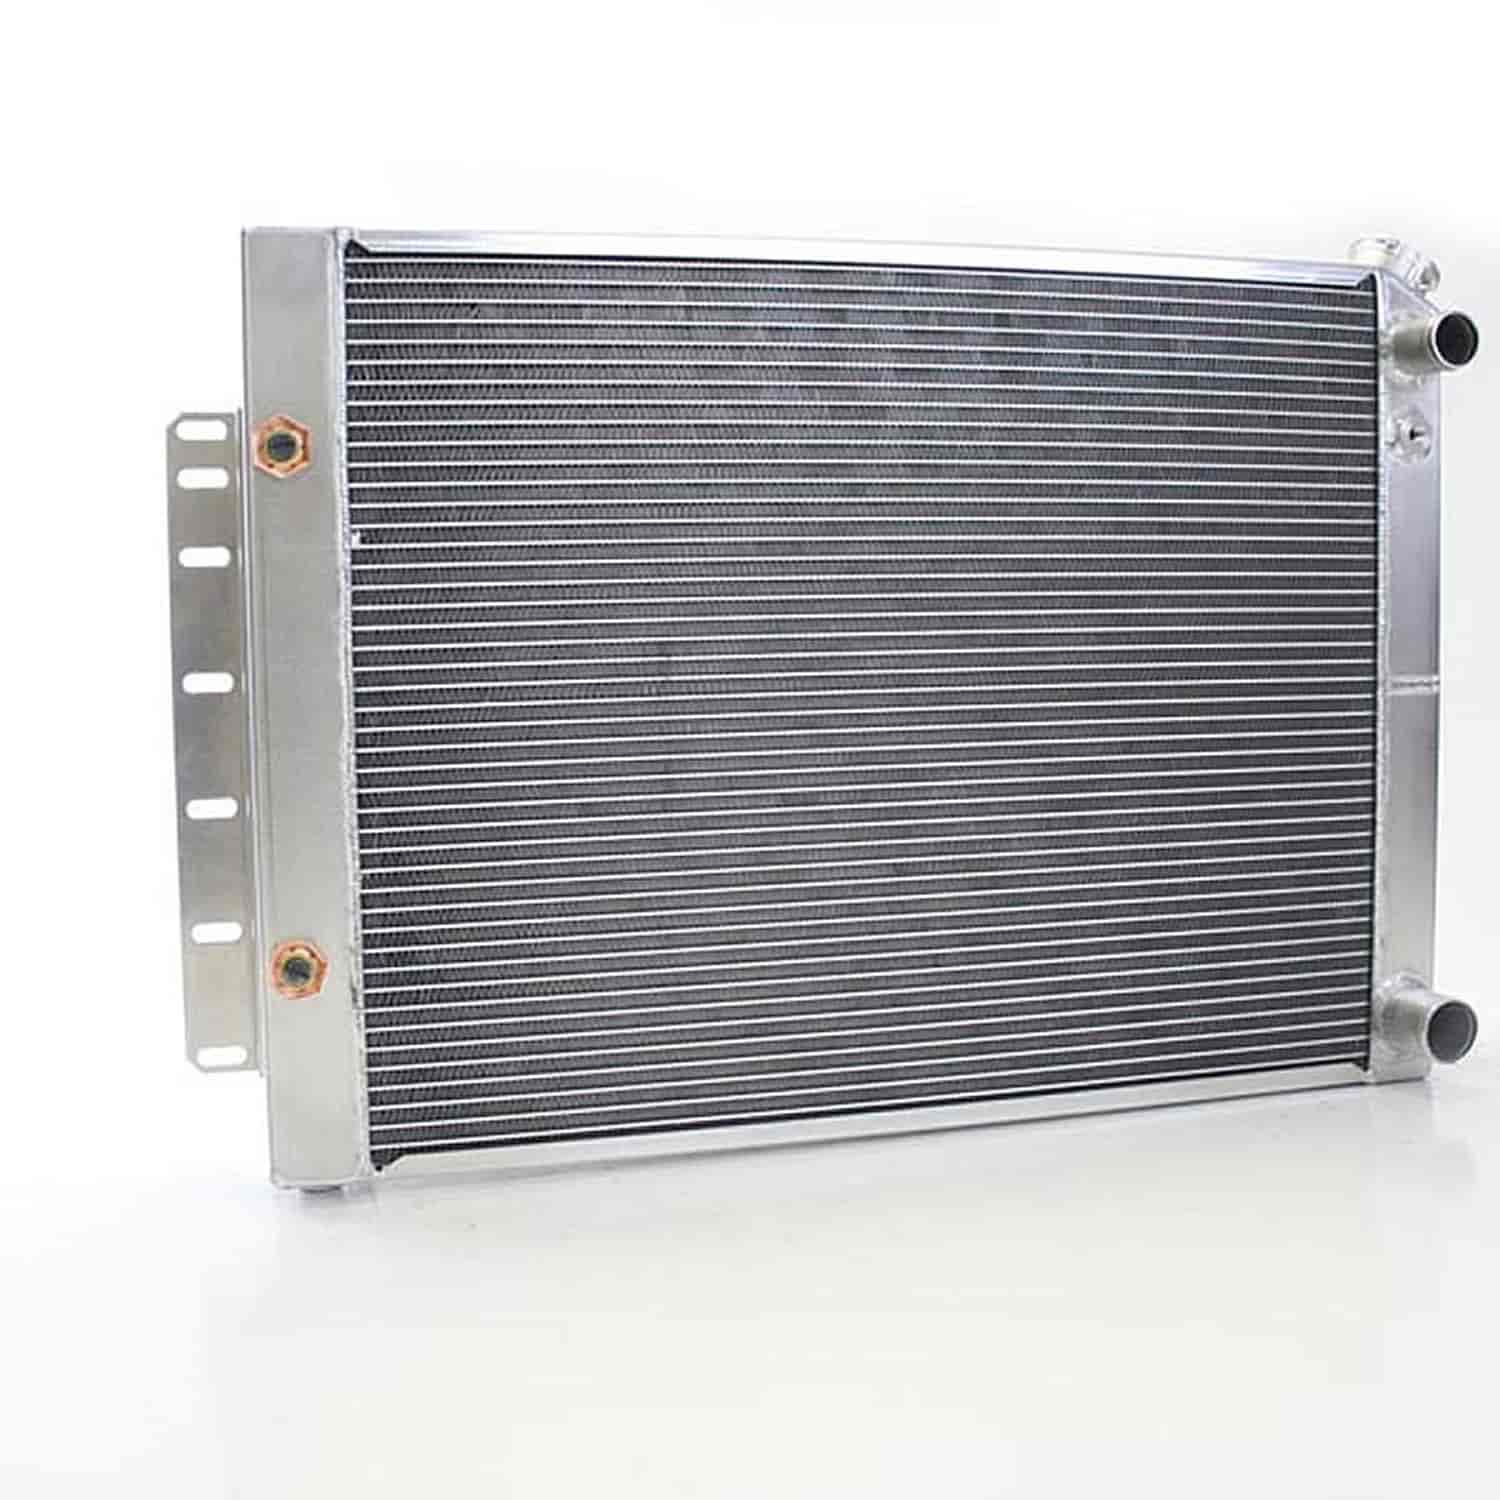 PerformanceFit Radiator for LS Swap GM 1959-1970 B Body with Transmission Cooler